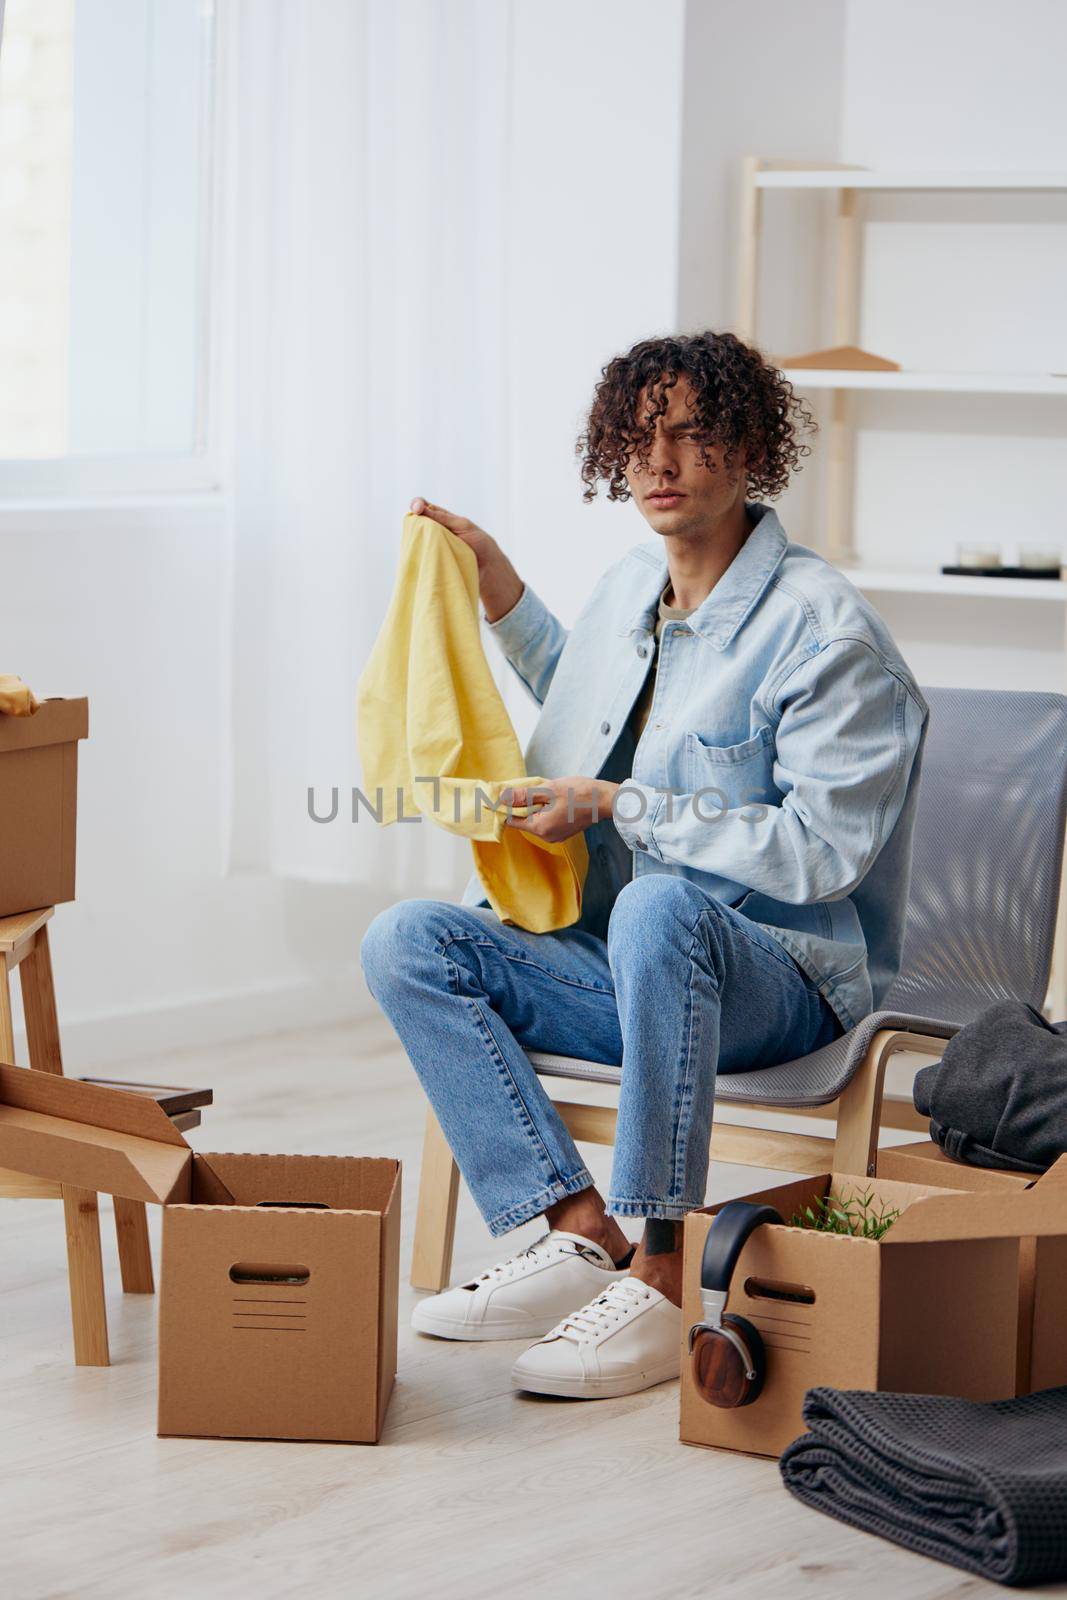 A young man cardboard boxes in the room unpacking interior by SHOTPRIME